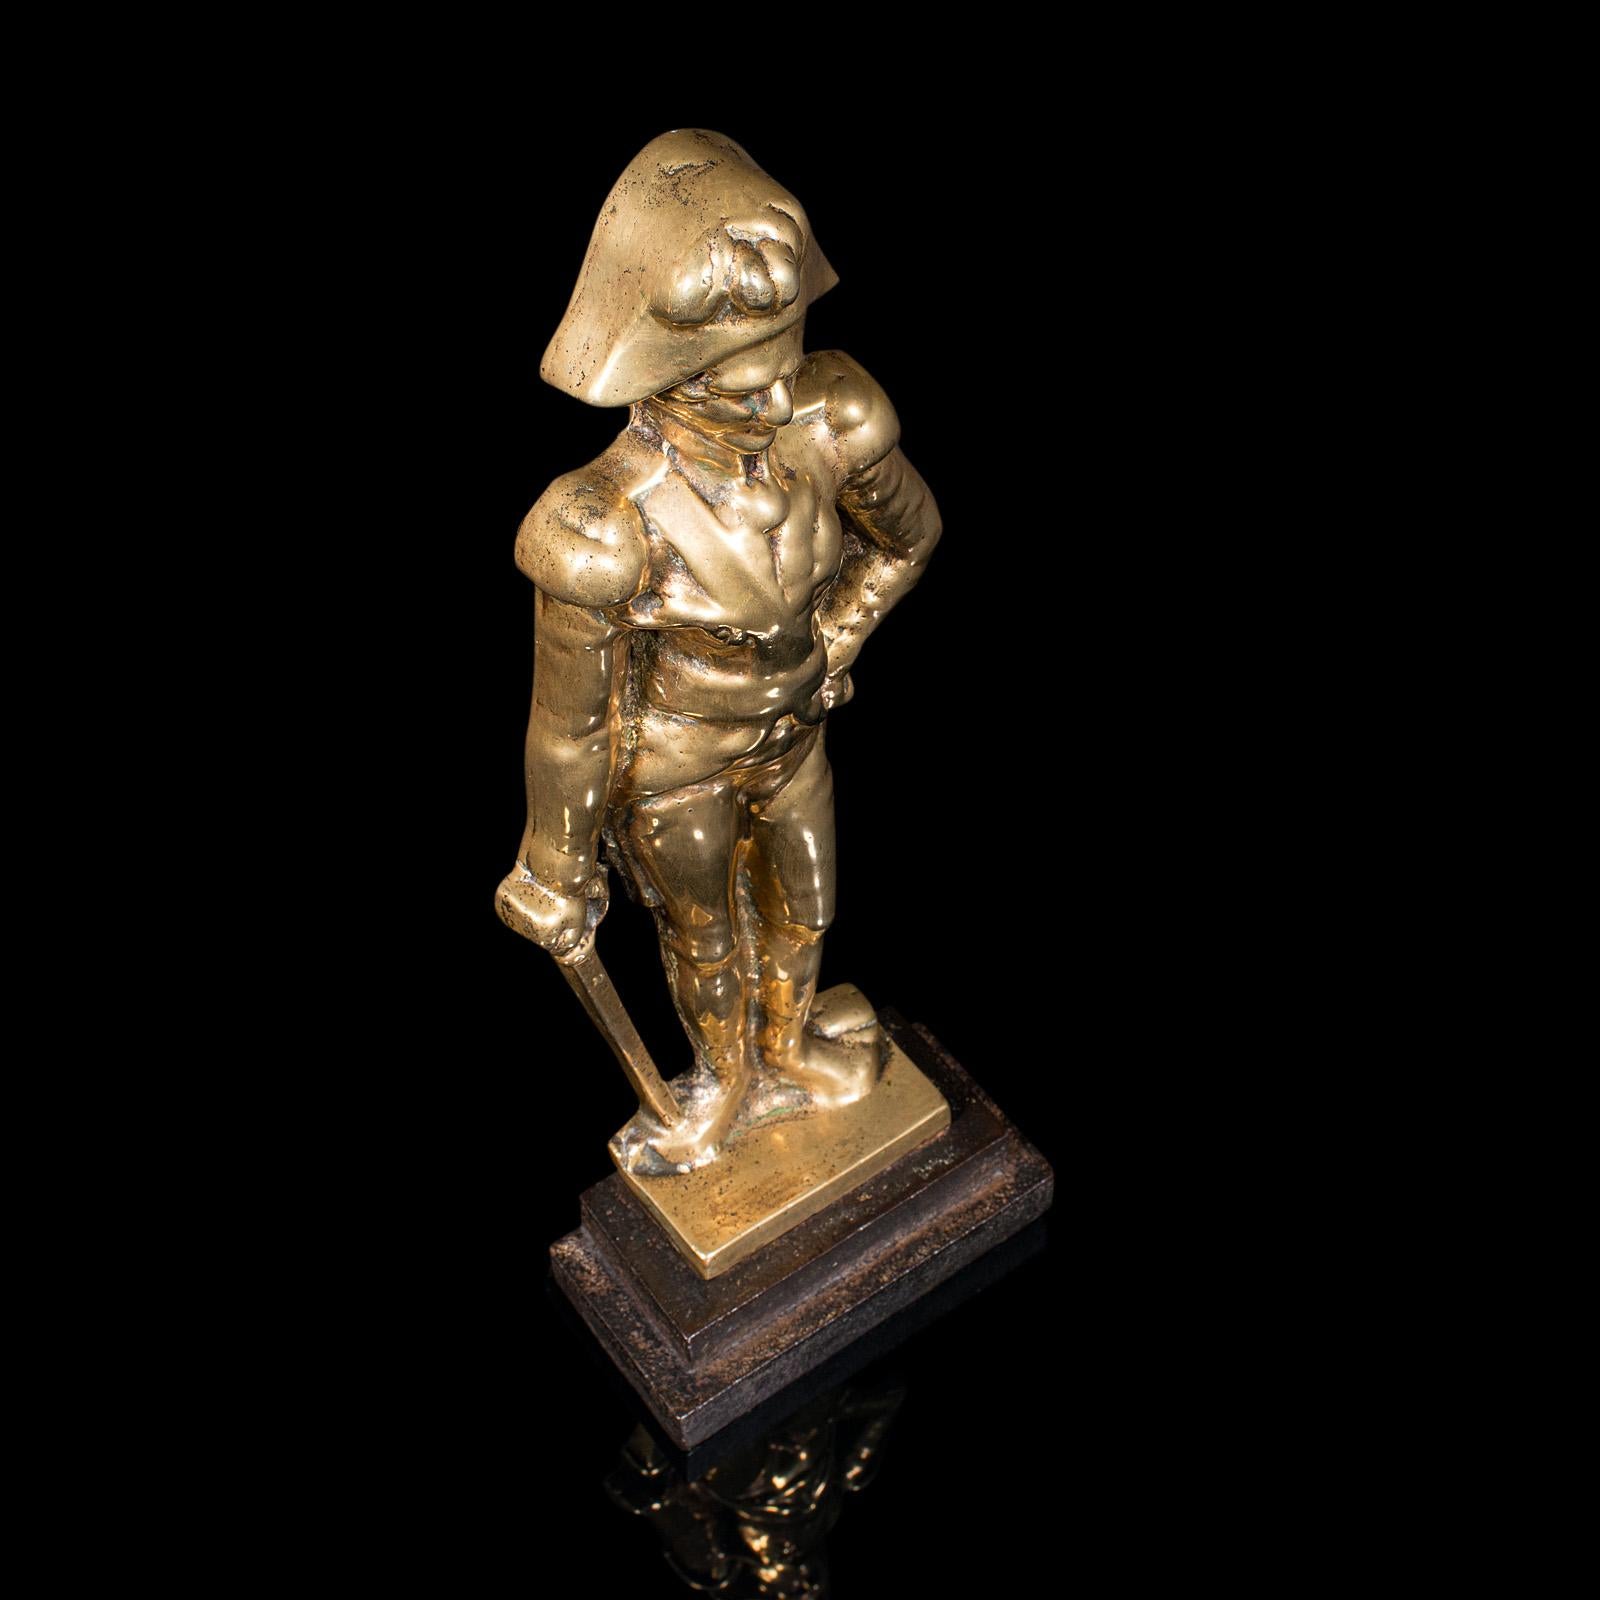 Antique Figural Doorstop, English, Brass, Lord Nelson, Door Keep, Late Georgian For Sale 1